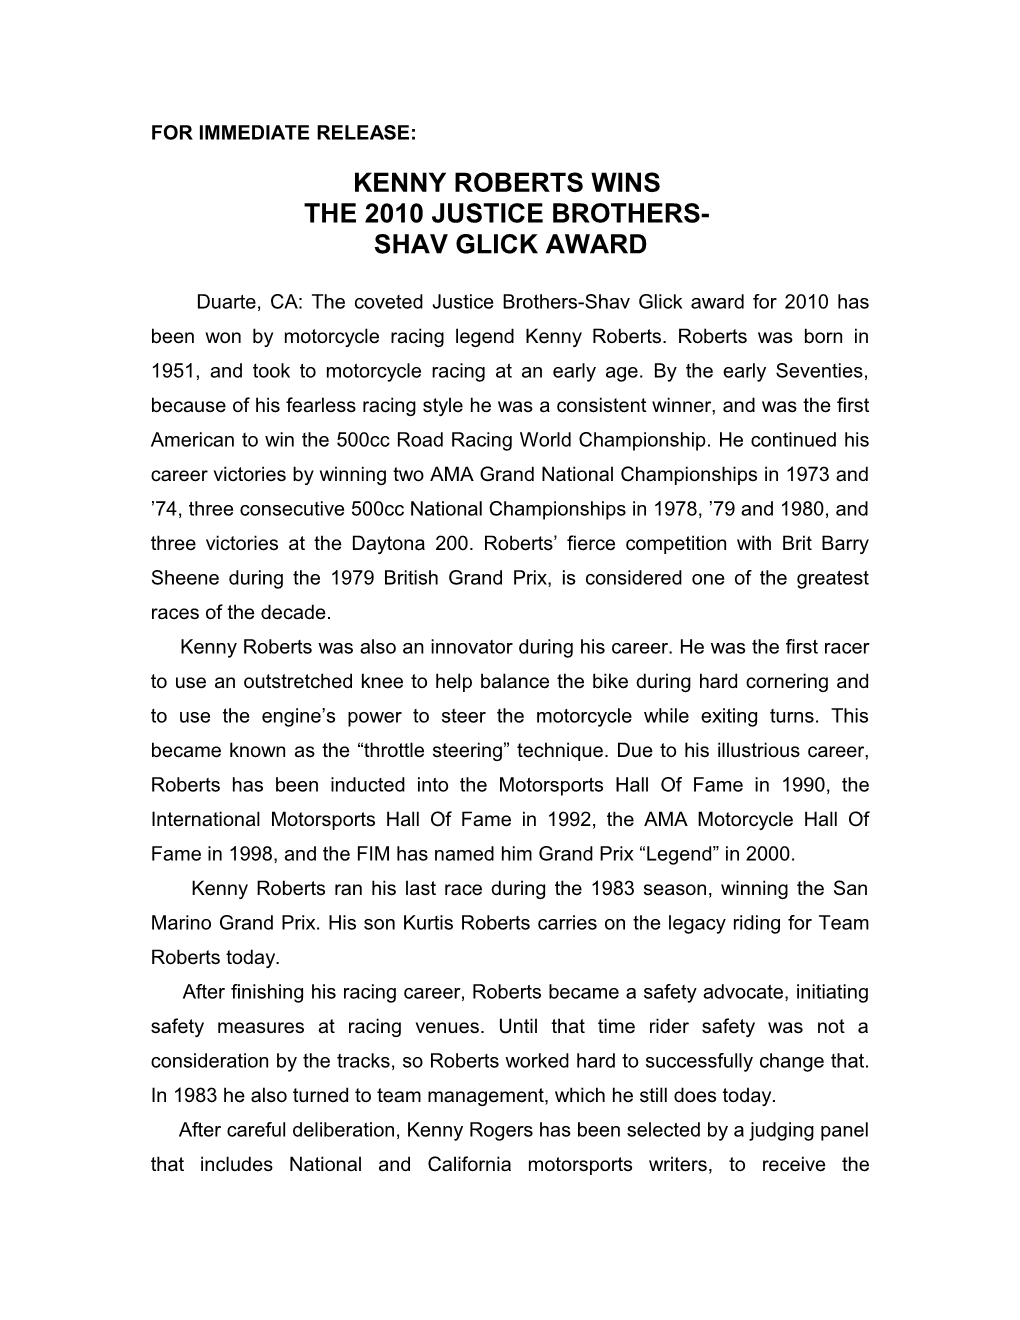 Kenny Roberts Is the First American to Win the 500Cc Road Racing World Championship